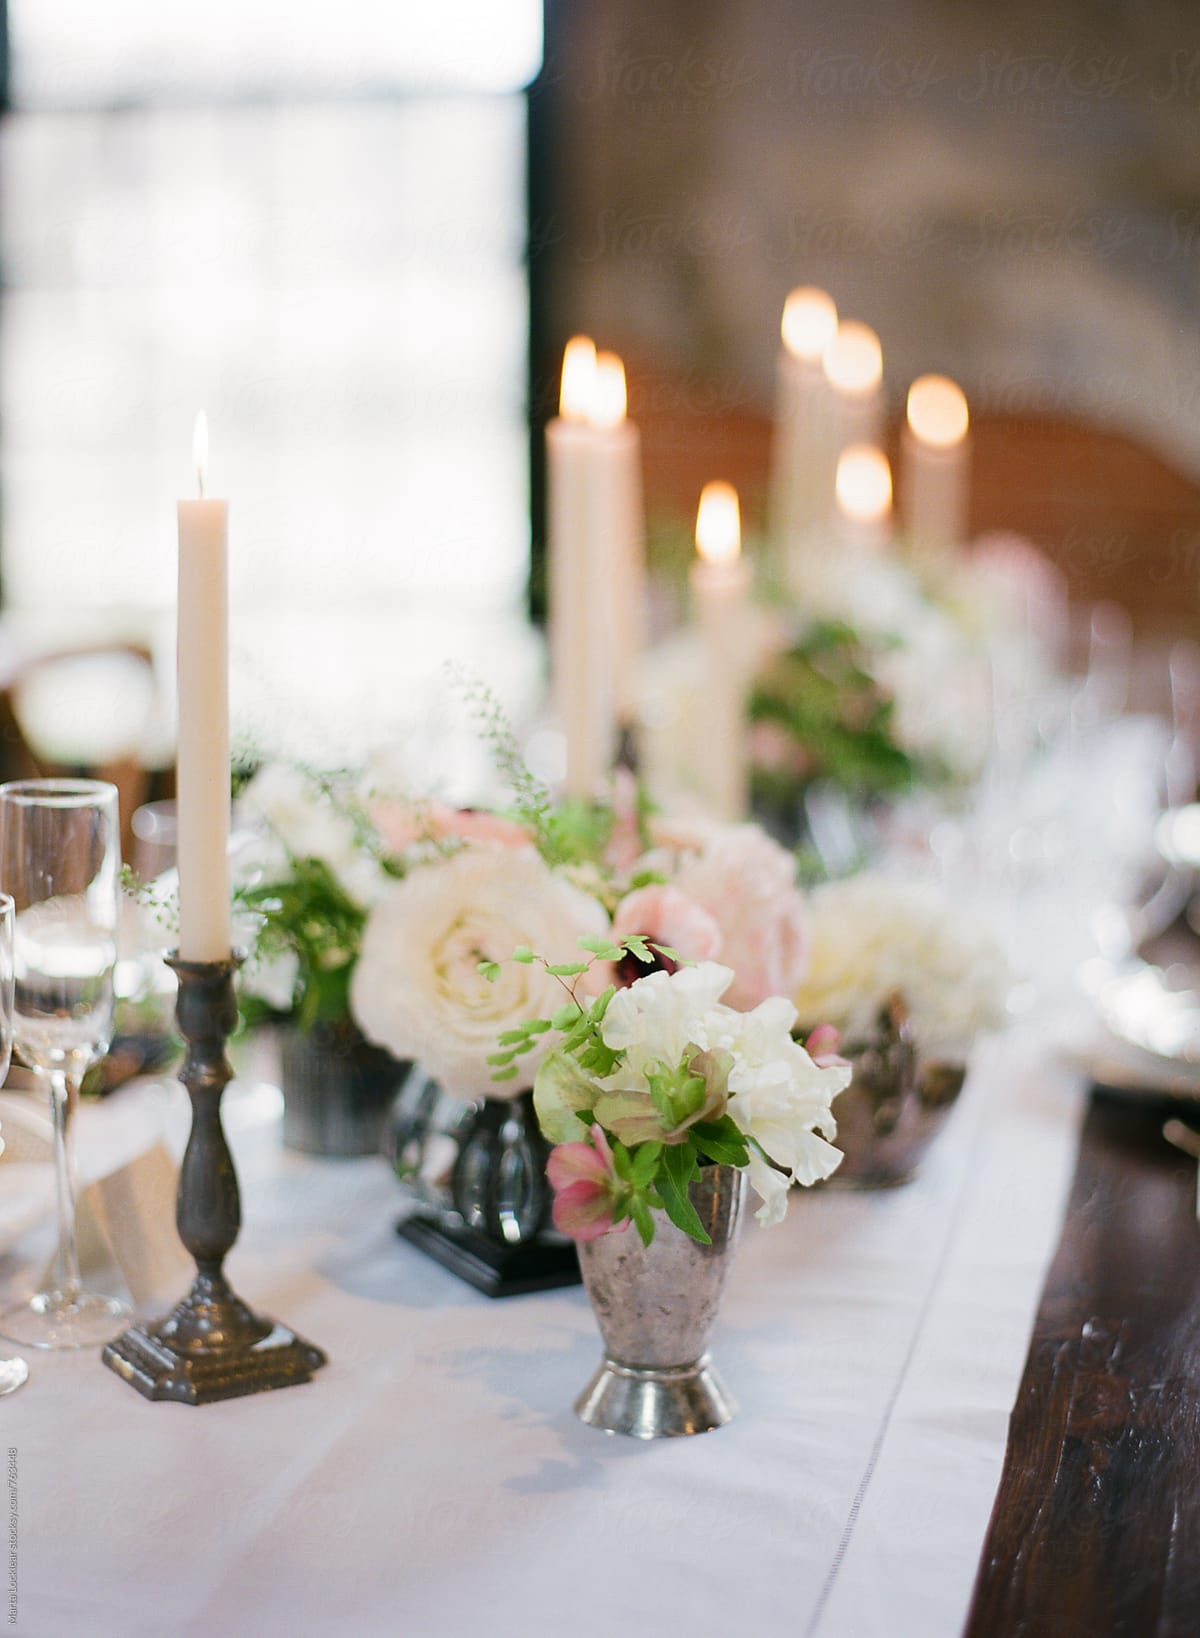 Floral arrangements and candlesticks on a formal dinner table